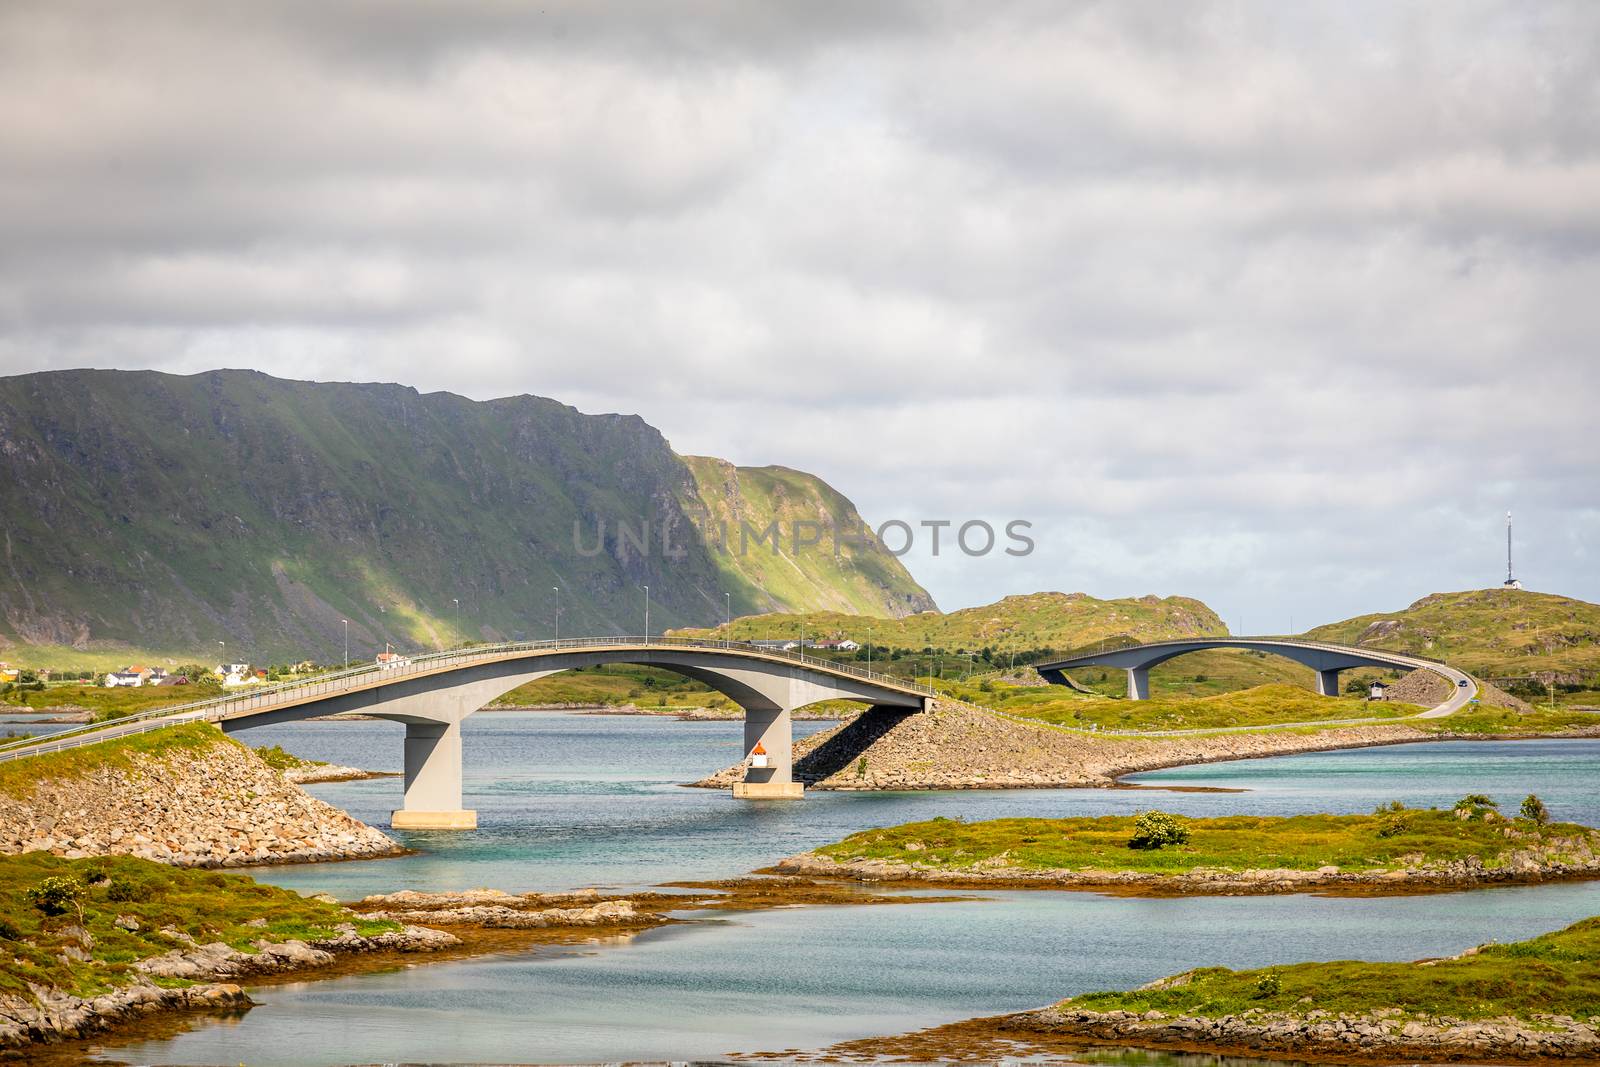 Twisted highway road with Freedvang bridges at the fjord, Lofoten island, Flakstad Municipality Nordland county, Norway